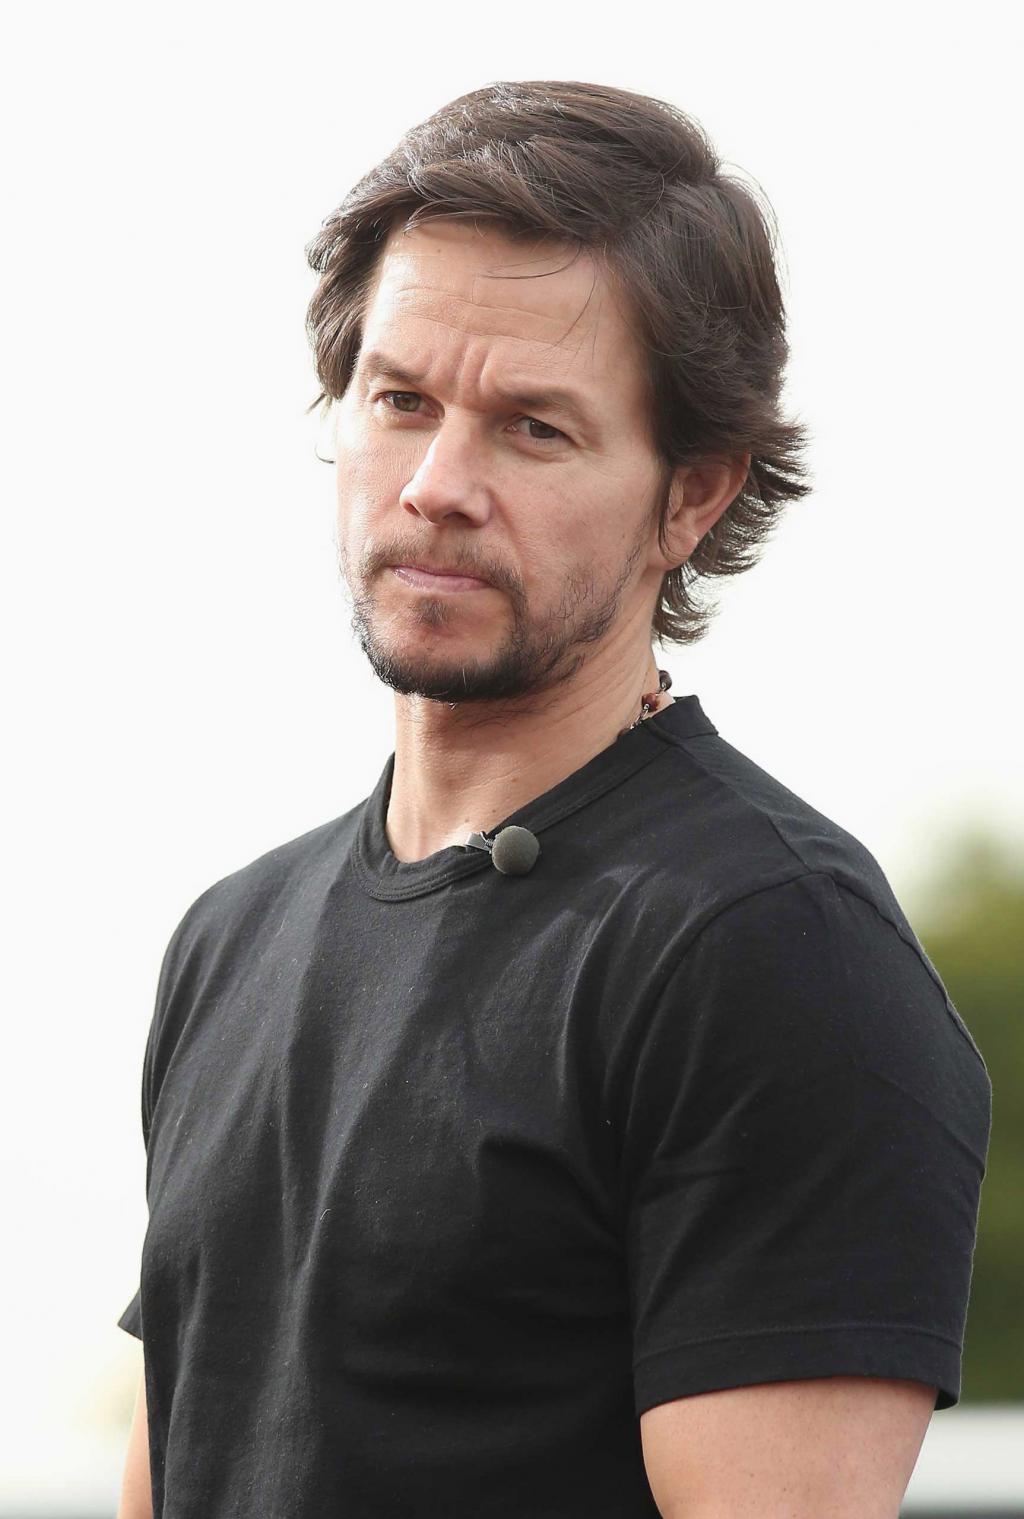 Mark Wahlberg Is Seeking A Pardon For His 1988 Assault Conviction   TIME